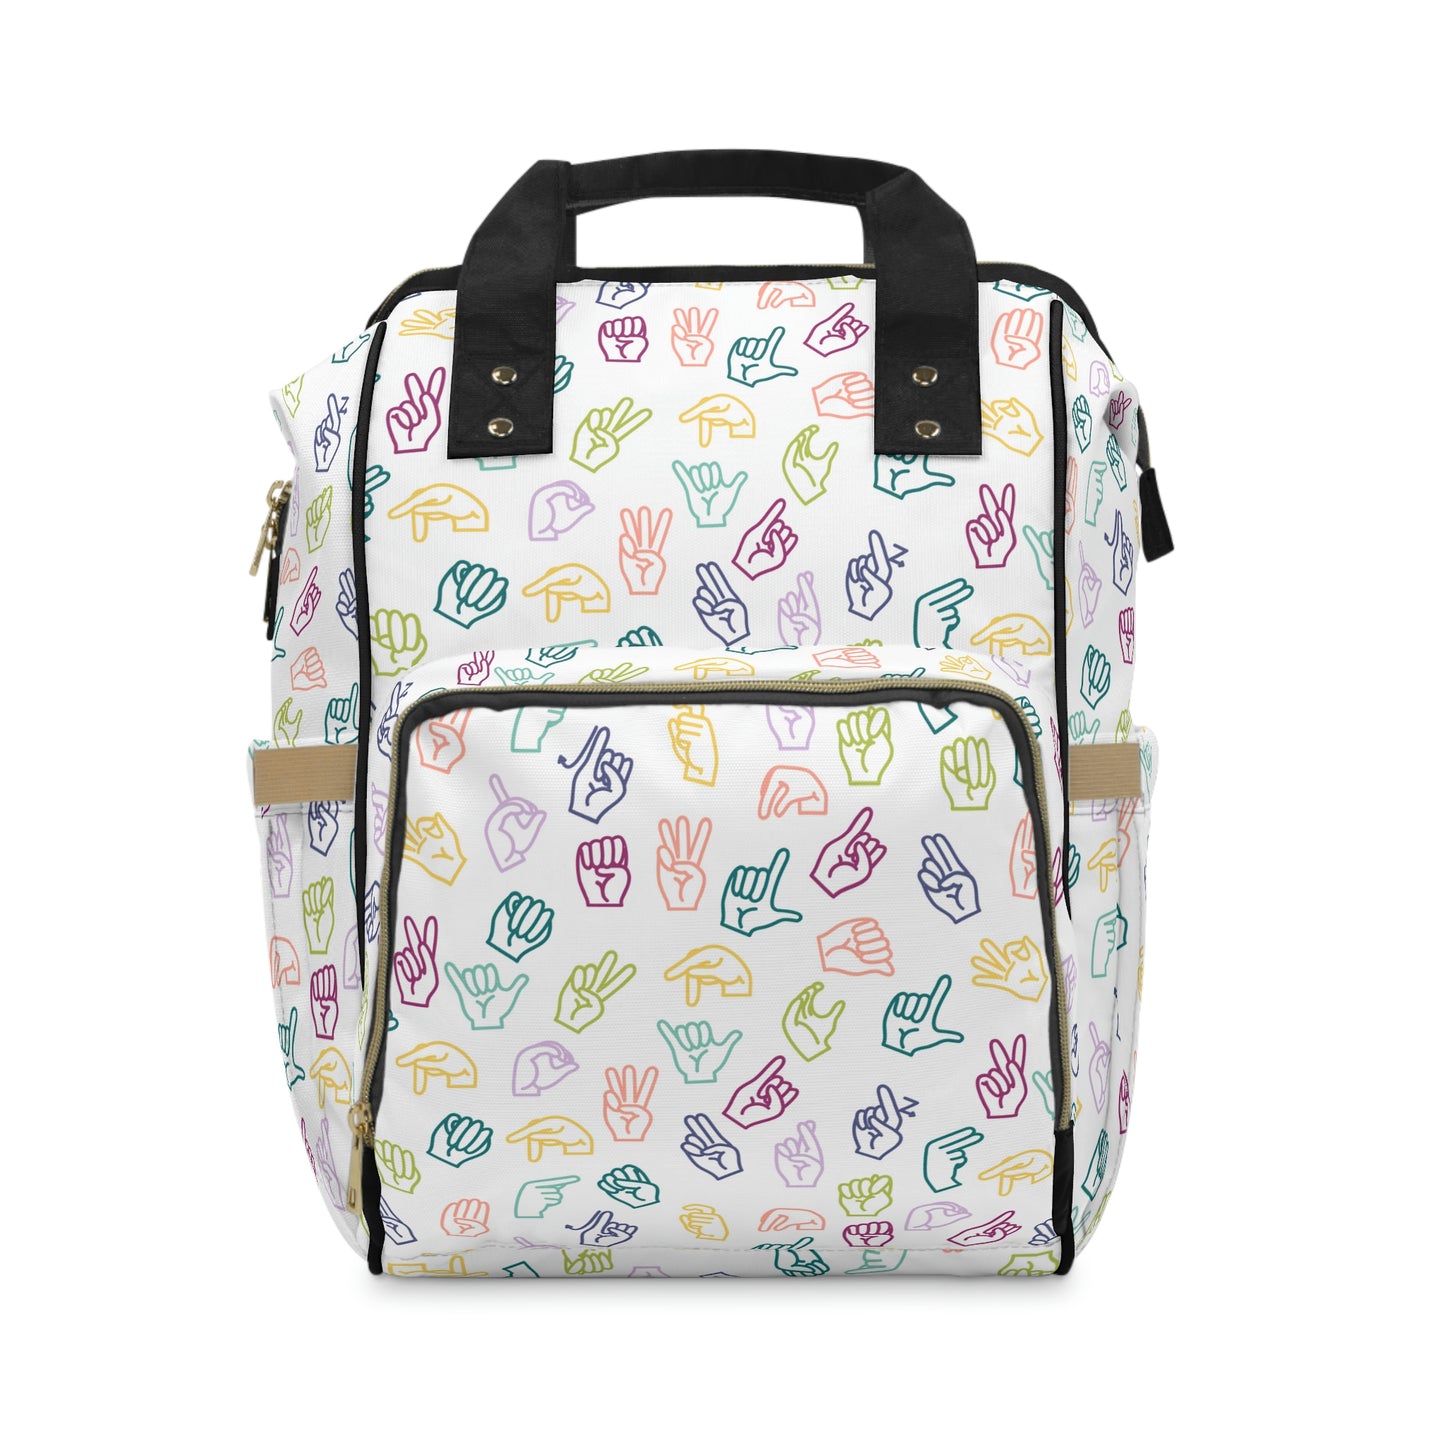 Muted Rainbow ASL Backpack